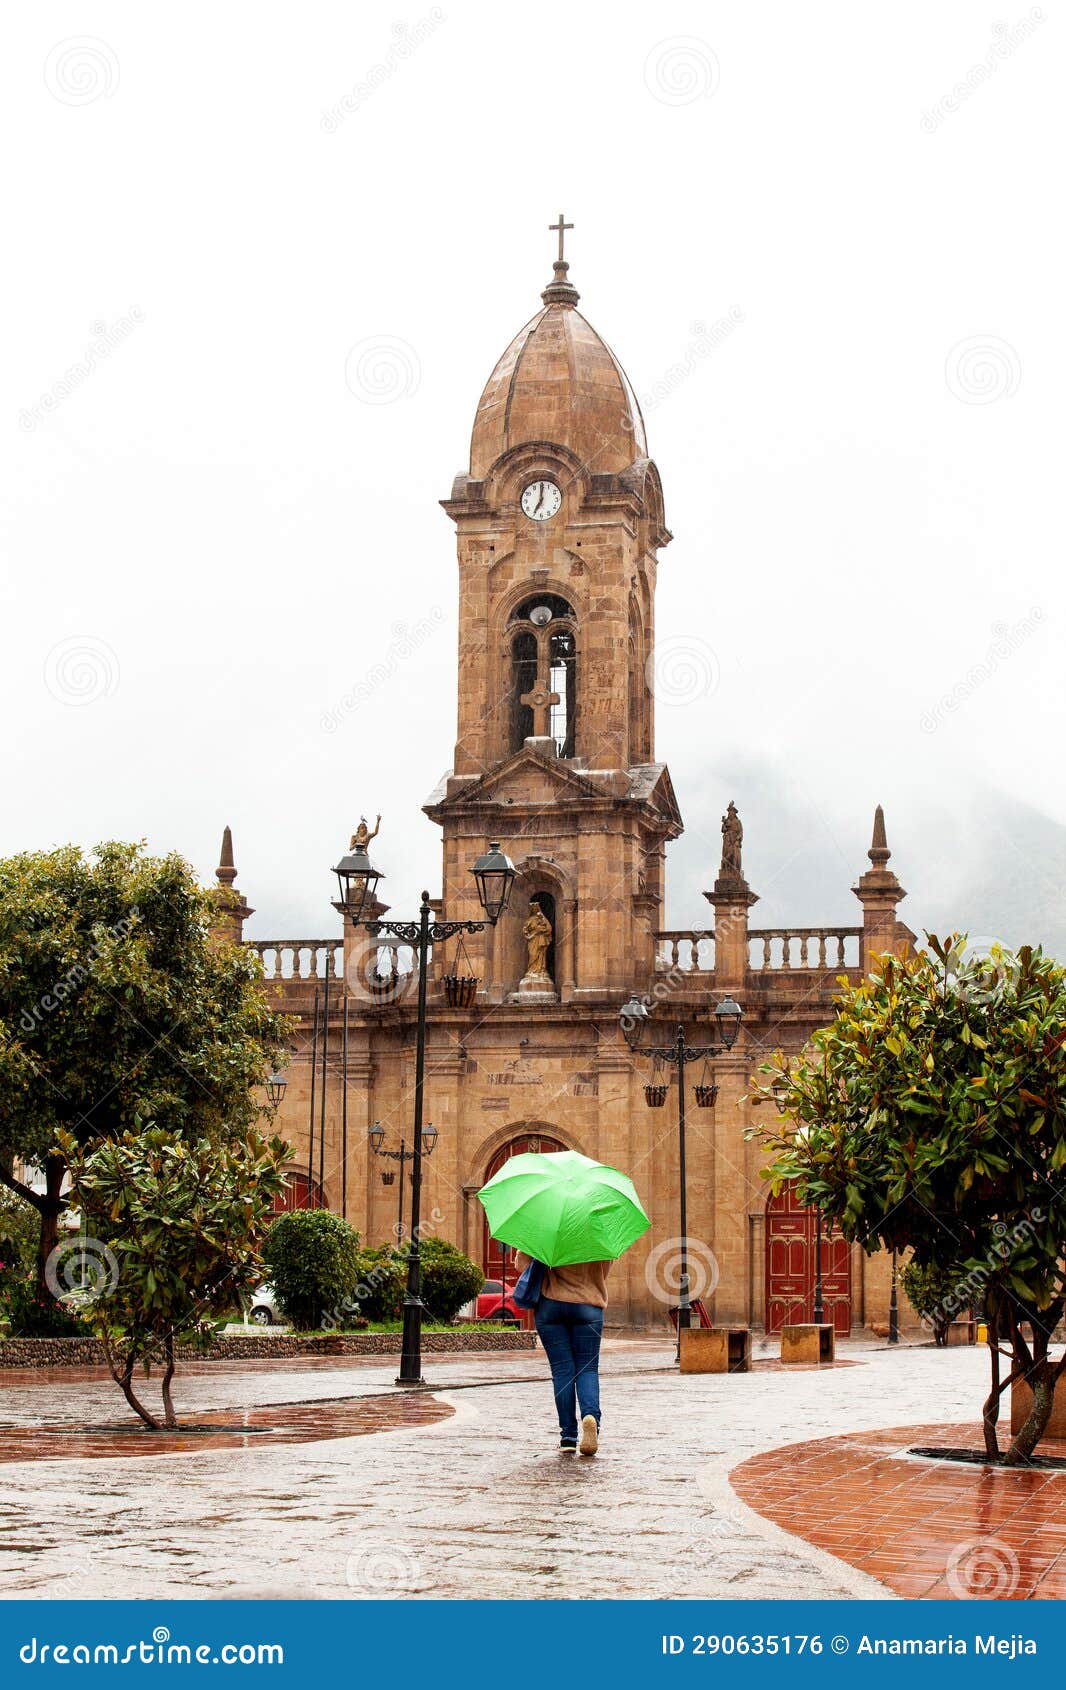 woman walking with an umbrella at the beautiful central square aof the small town of nobsa in a rainy day